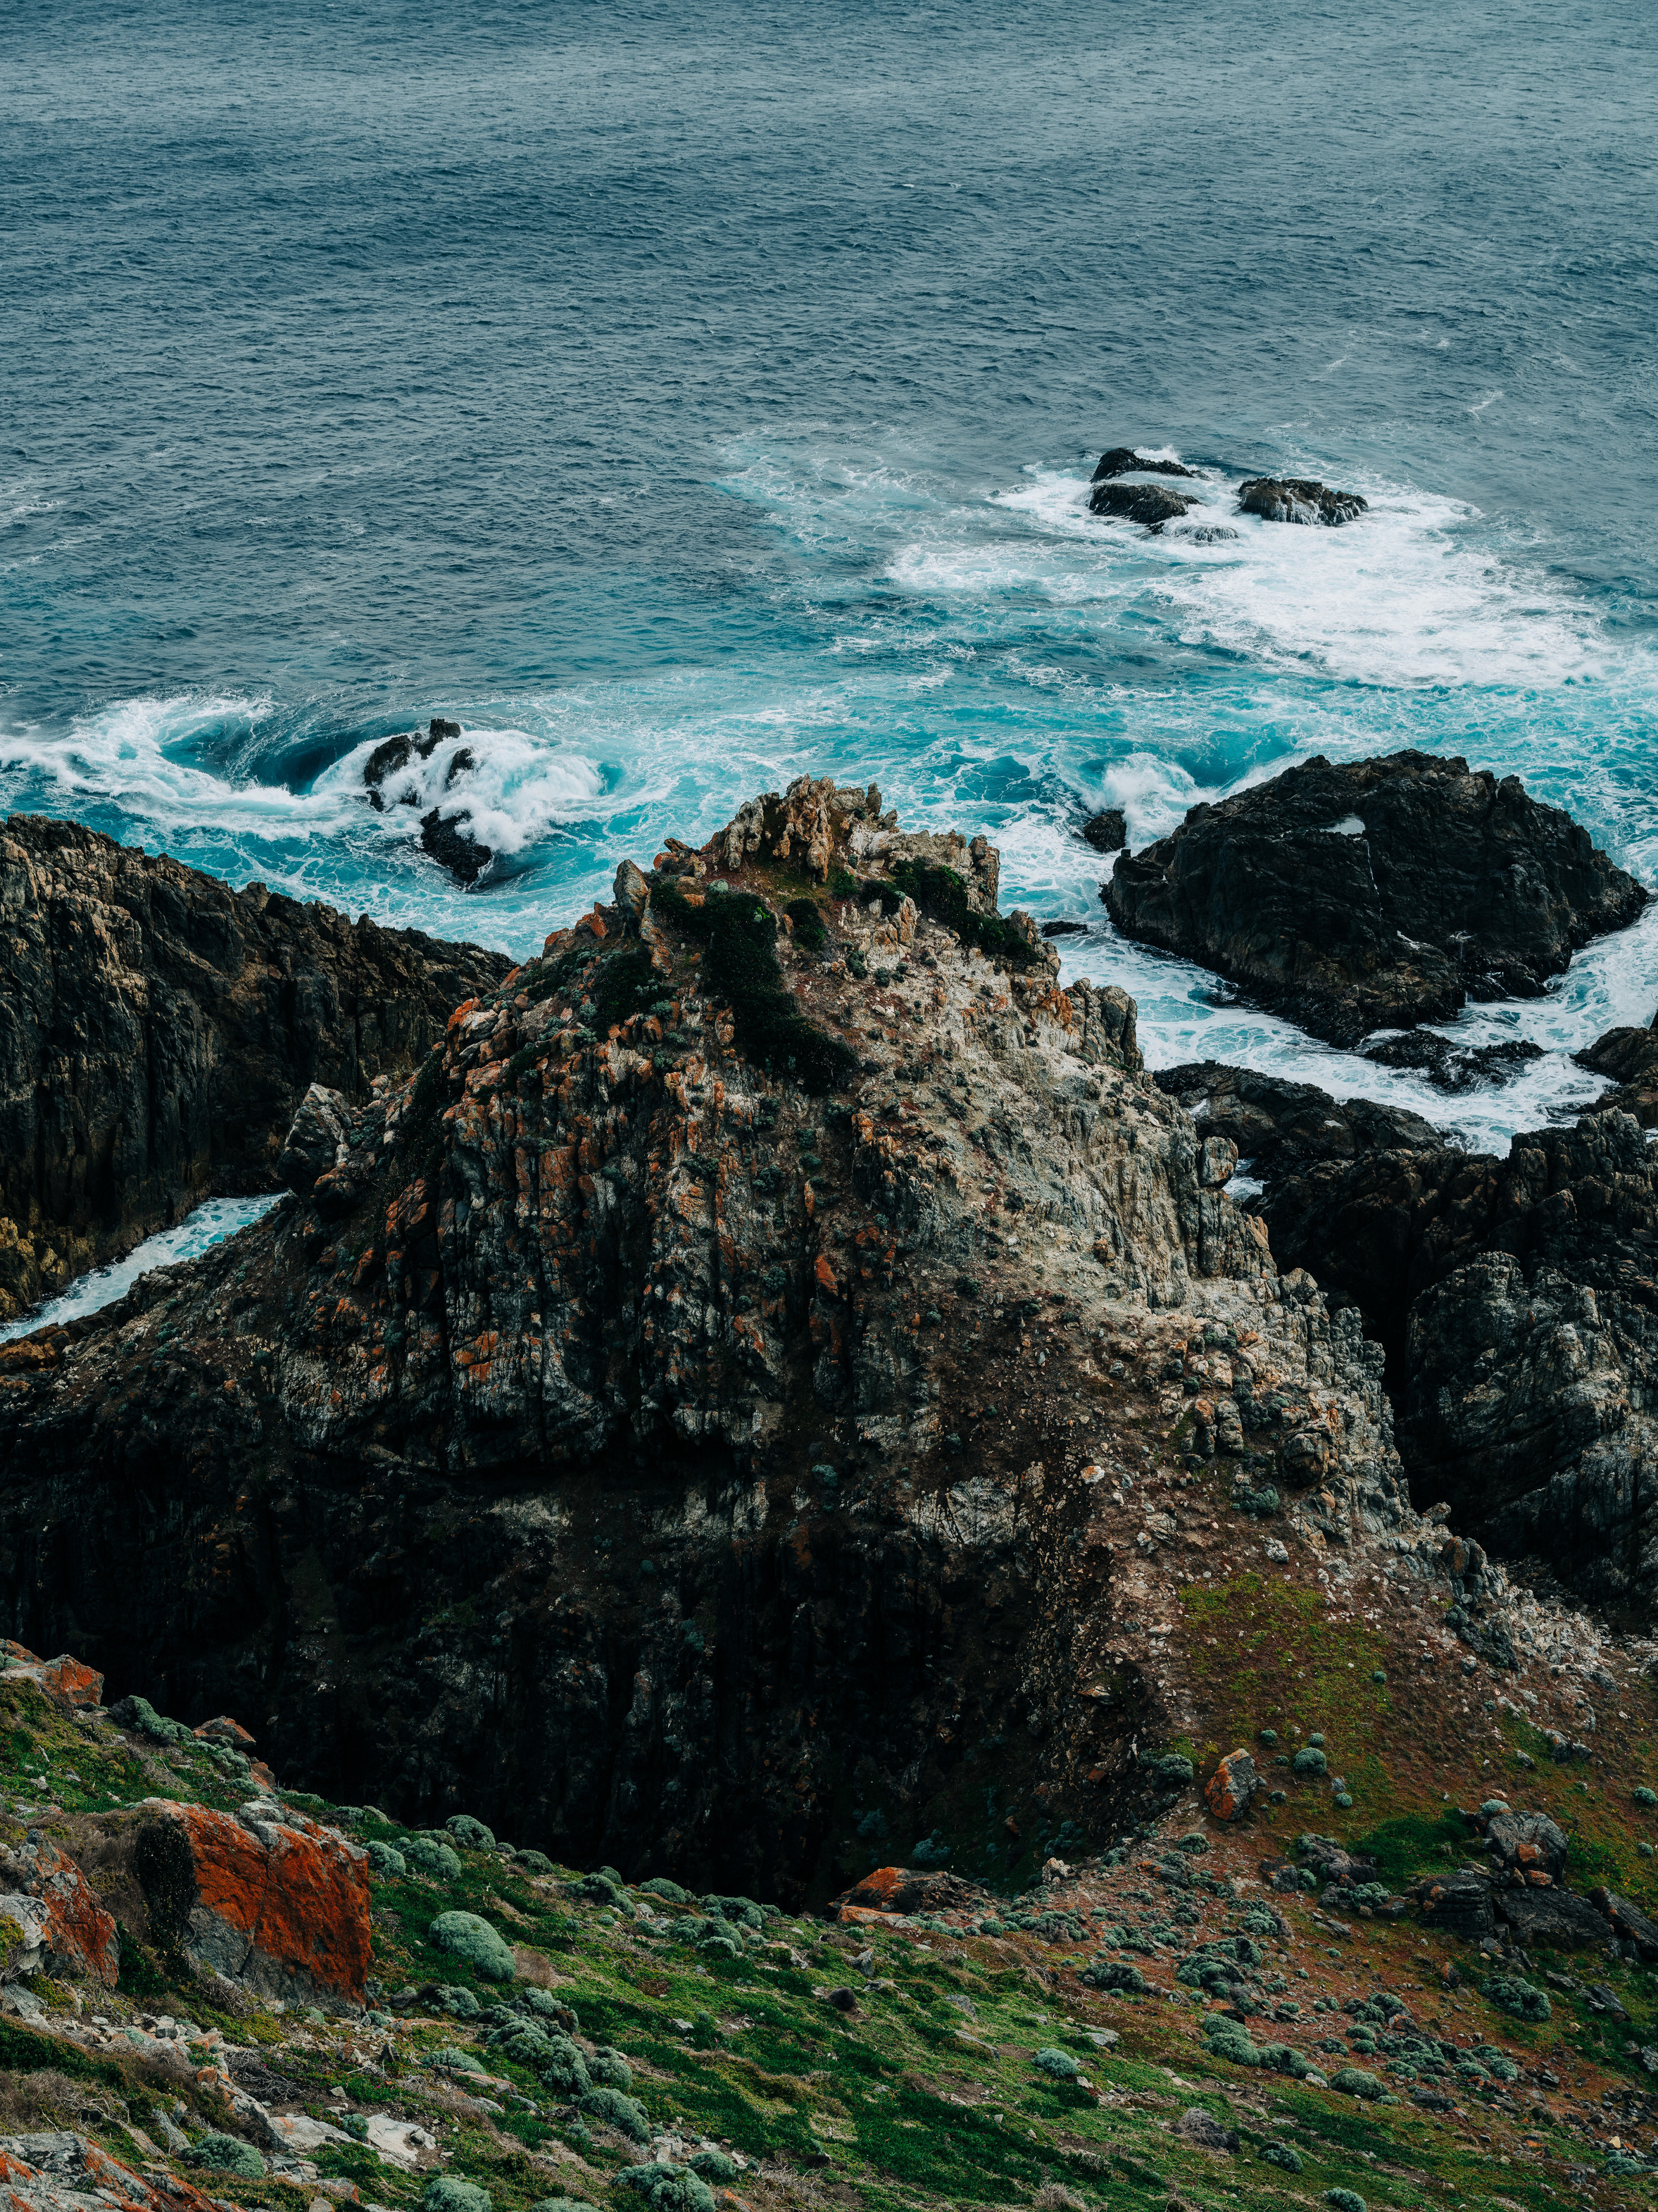 An incredible image of Seal Rocks A steep, rocky descent from the top, down to the ocean. One of the most dramatic views on King Island.